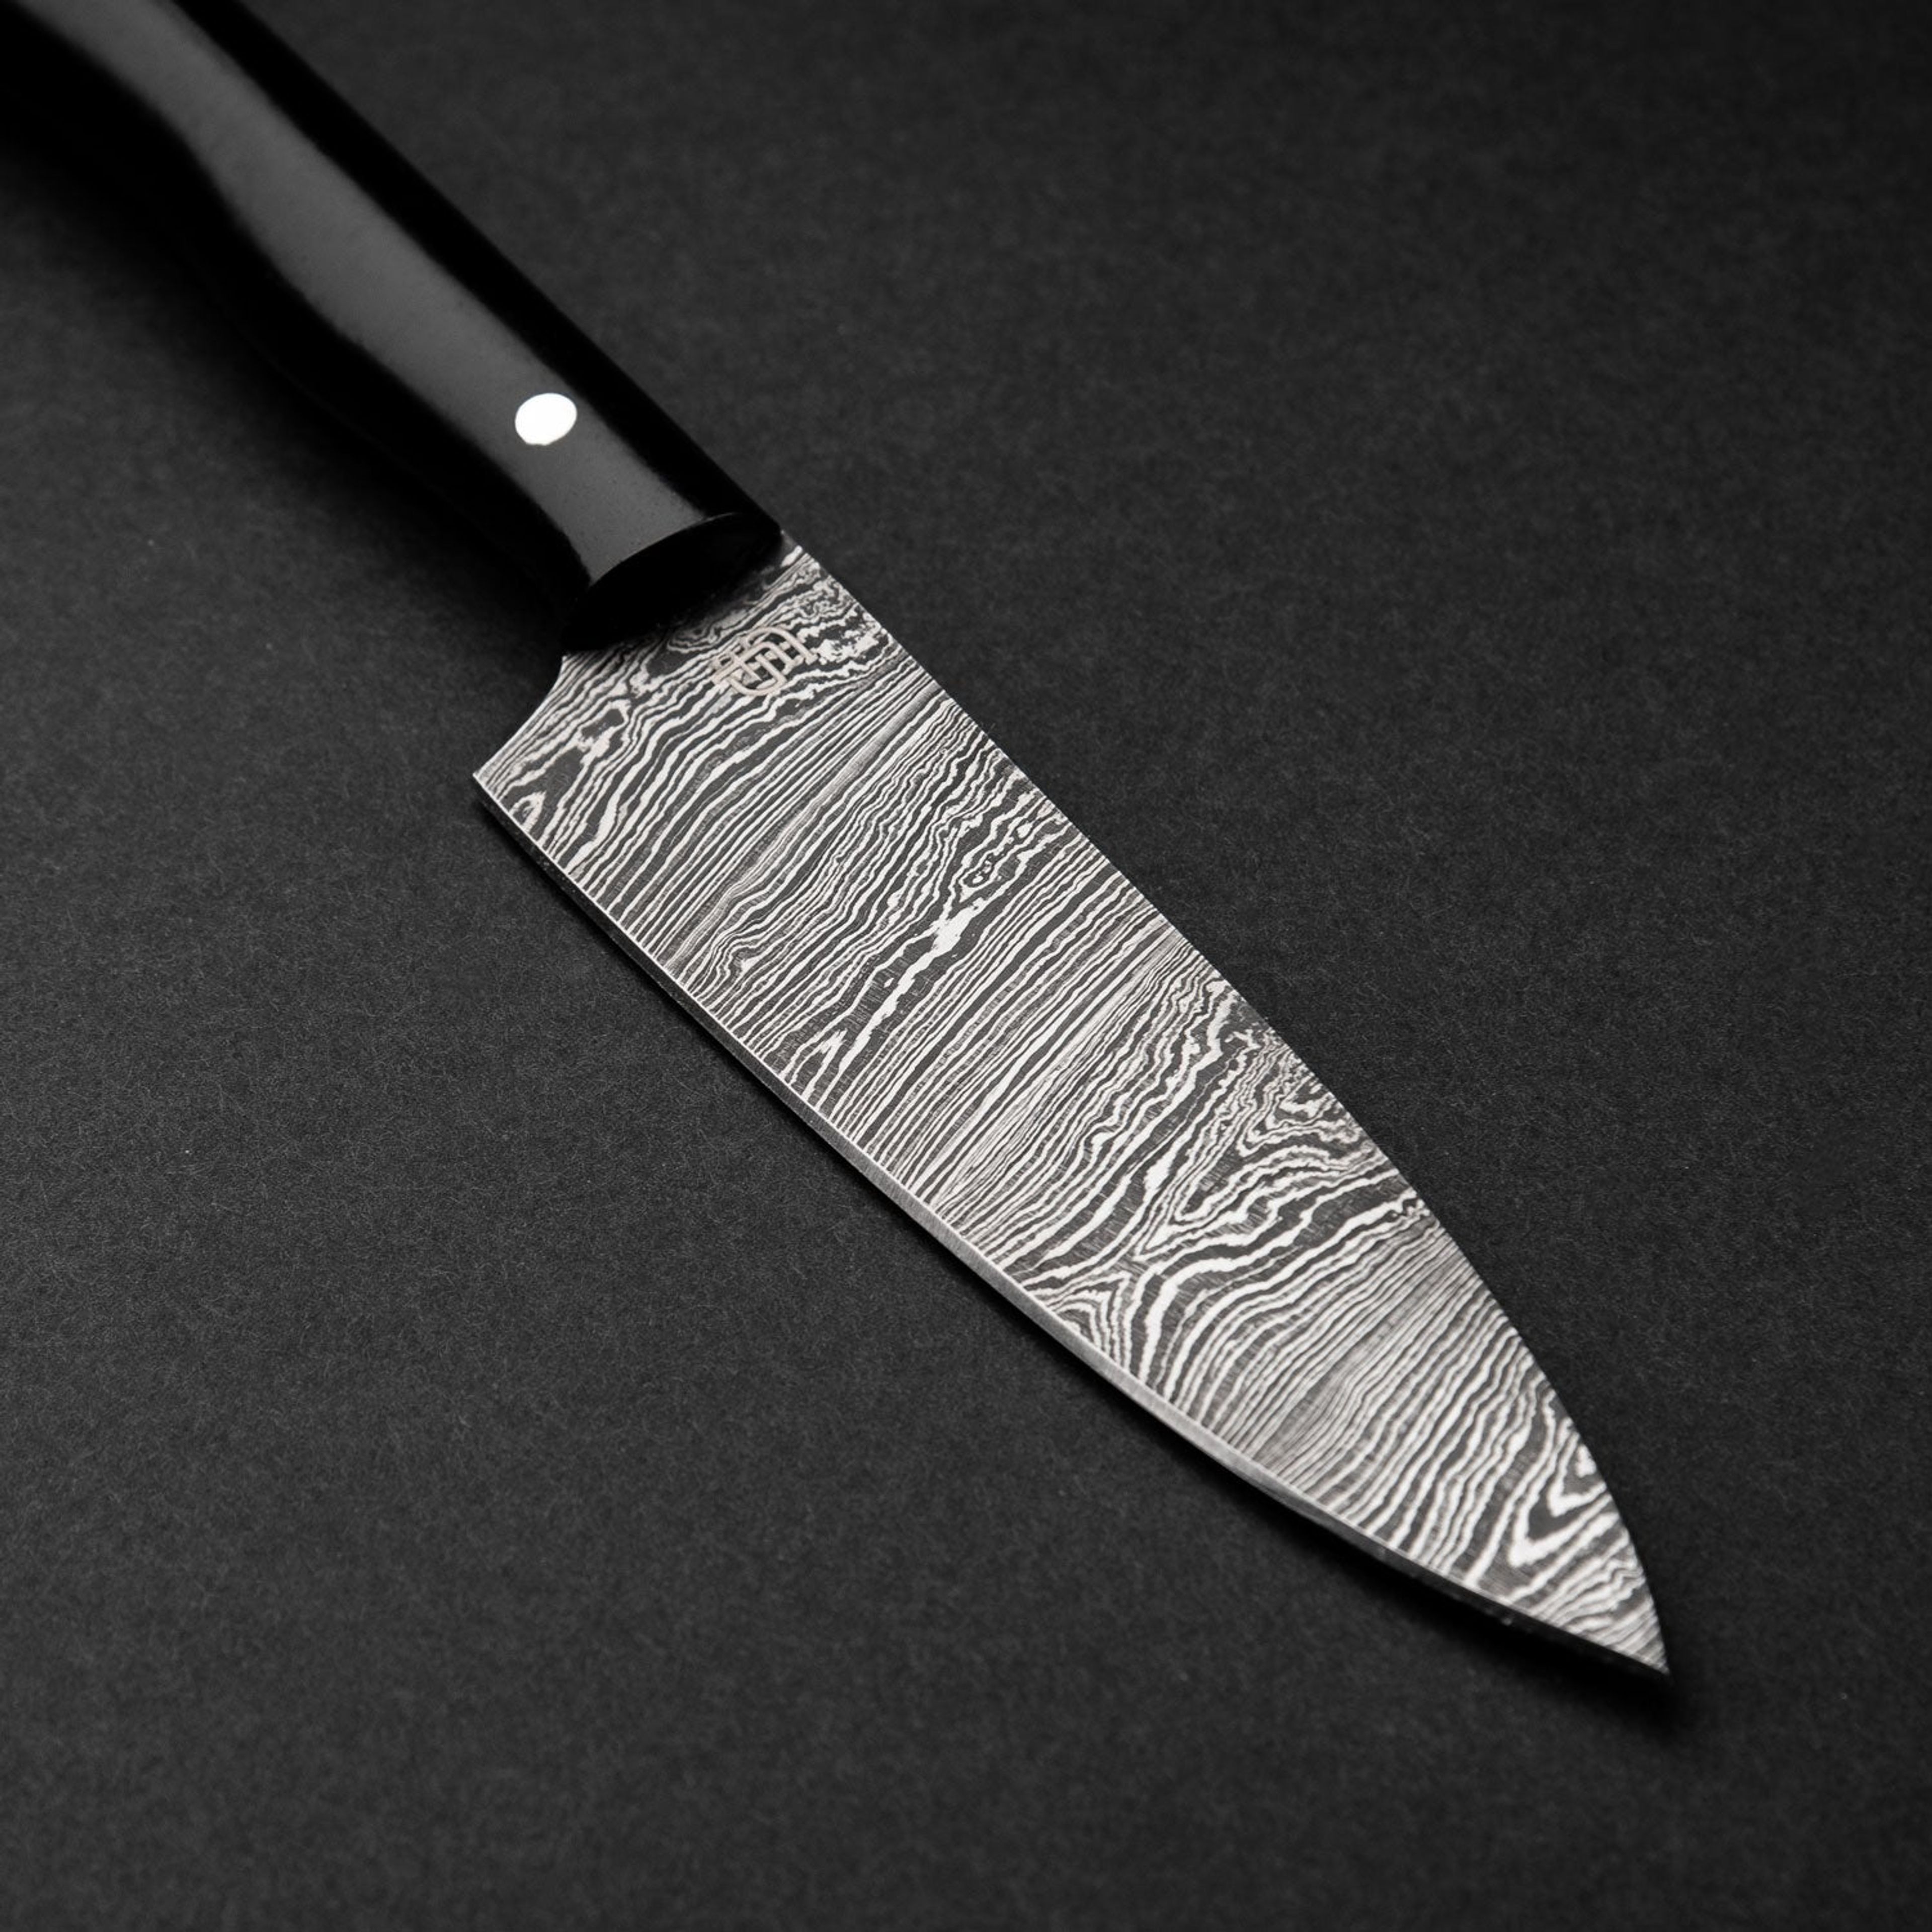 Epicure Damascus Steel 4.5" Petty Utility Knife - G10 Handle